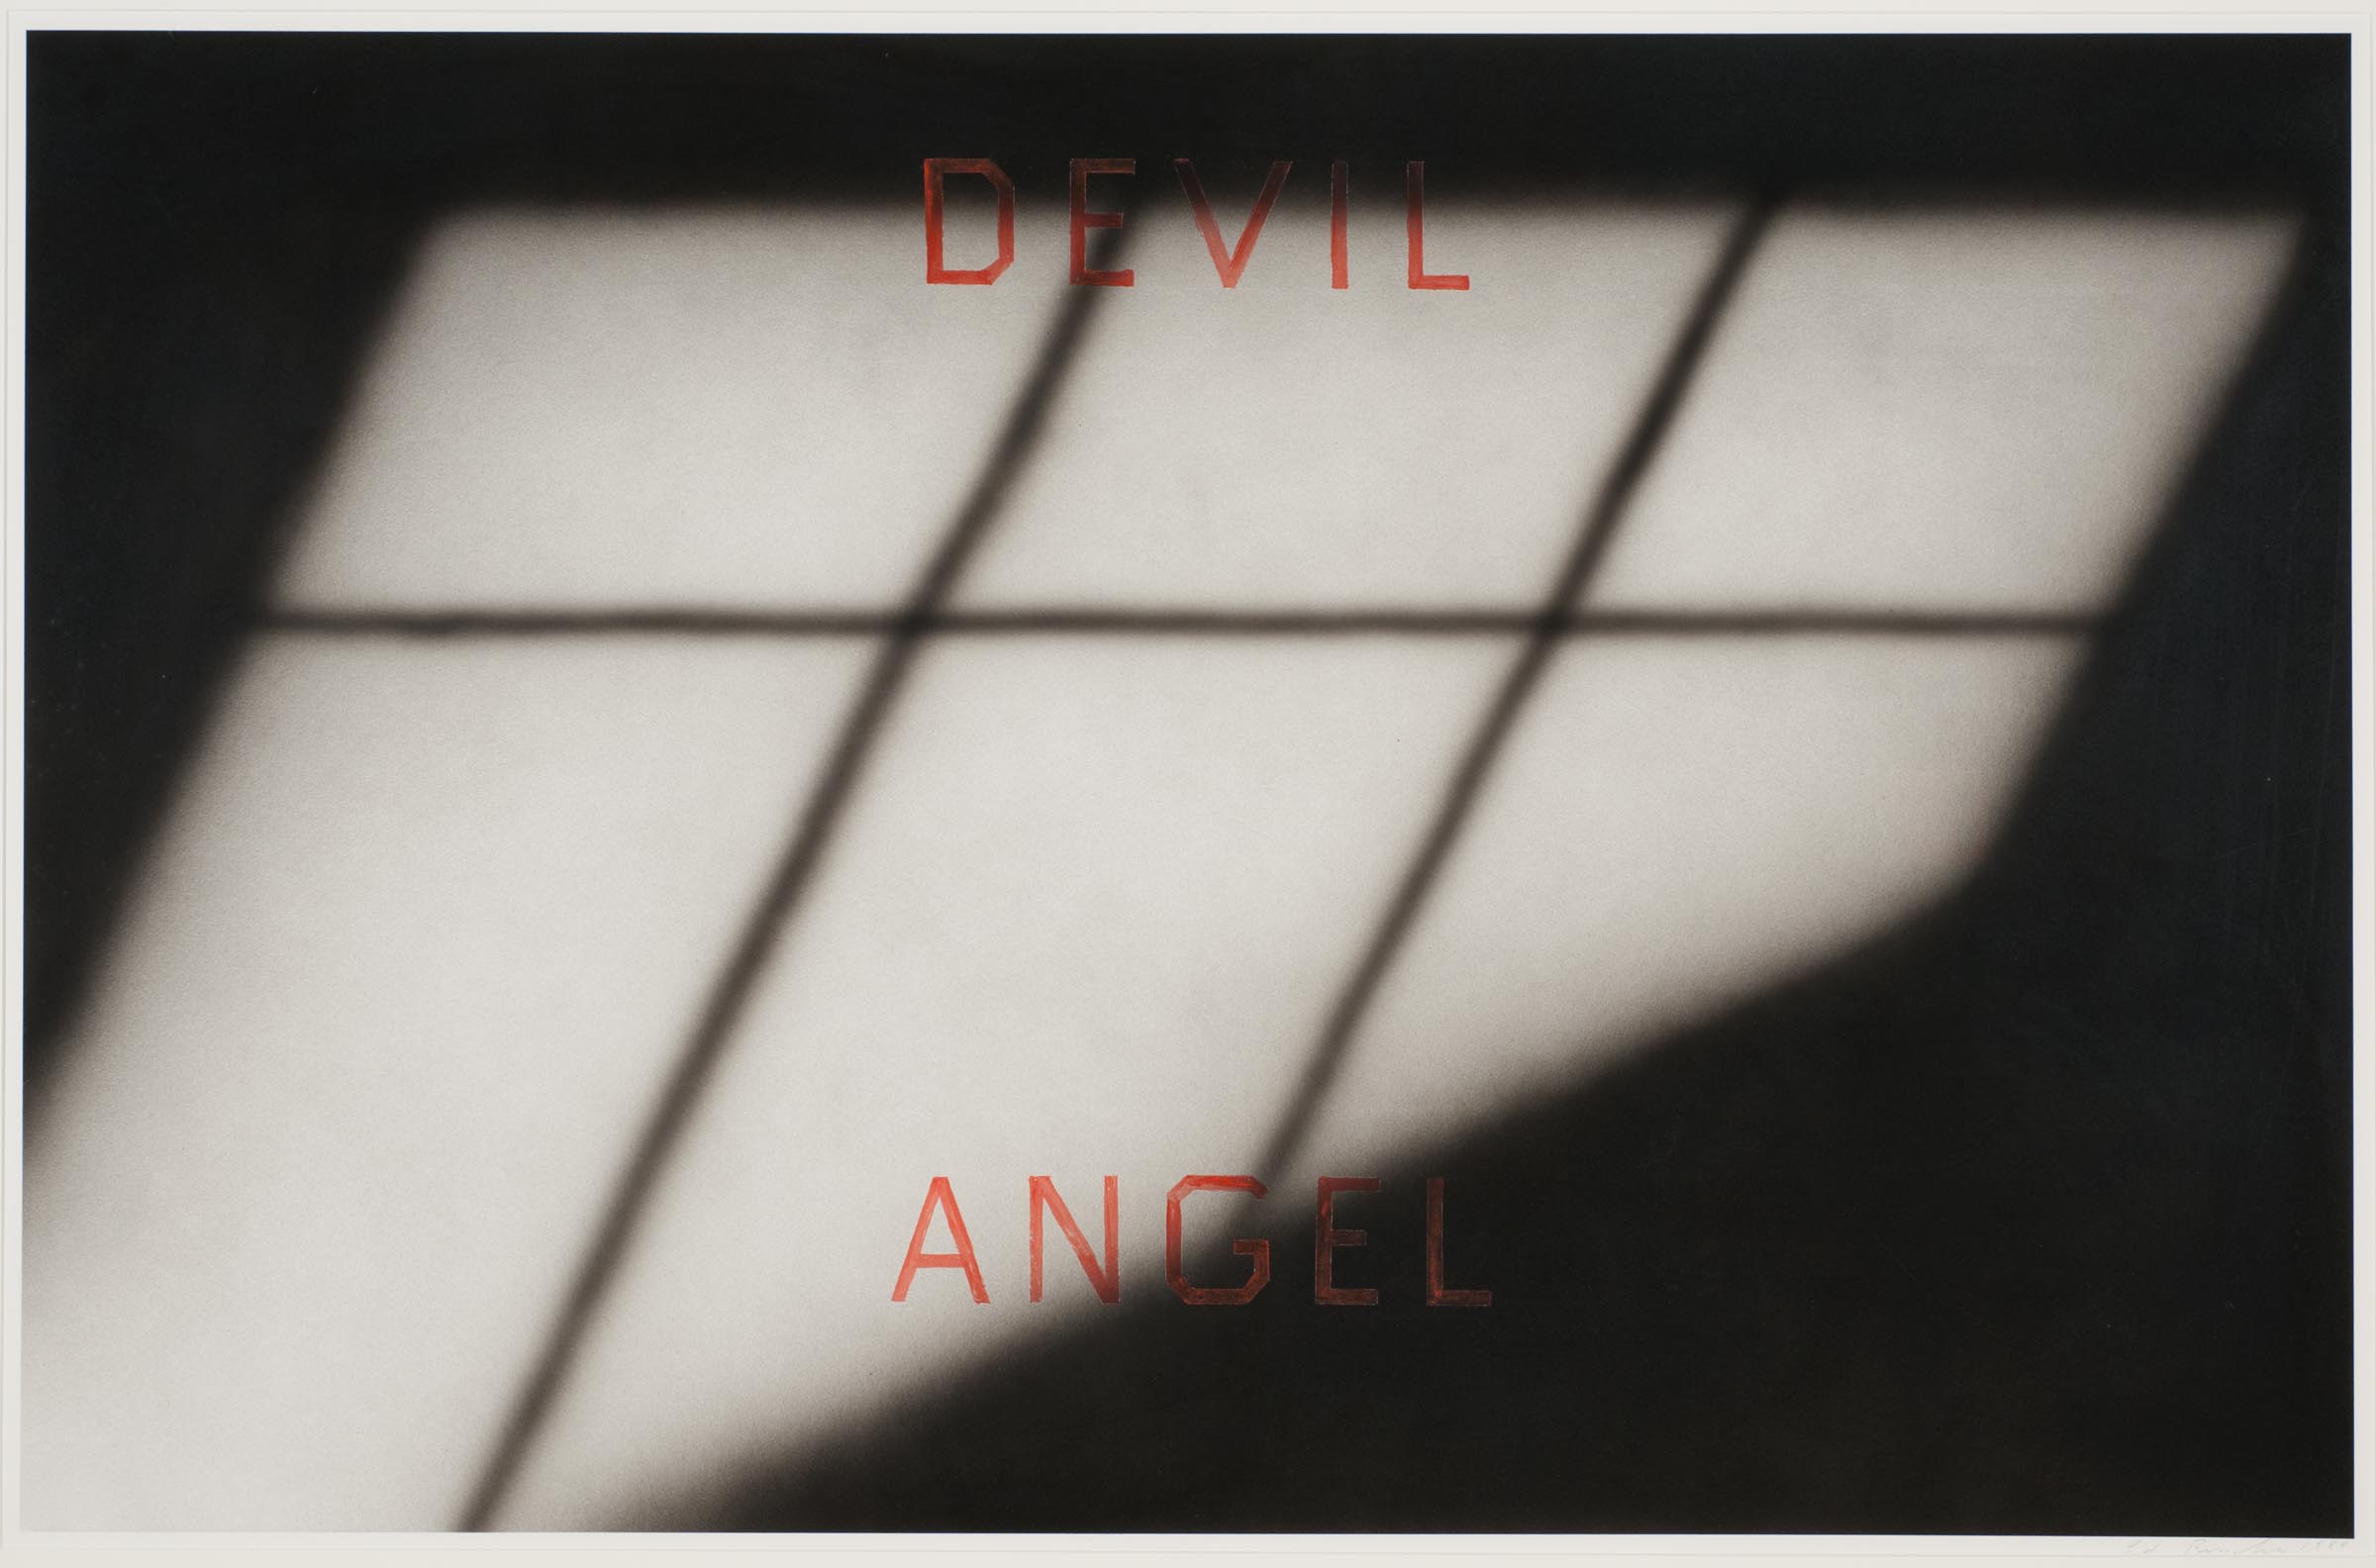 Ed Ruscha, “Devil Angel,” 1988, pigment and acrylic on paper, Carnegie Museum of Art, Gift of Dr. and Mrs. Karl Salatka, © Edward Ruscha